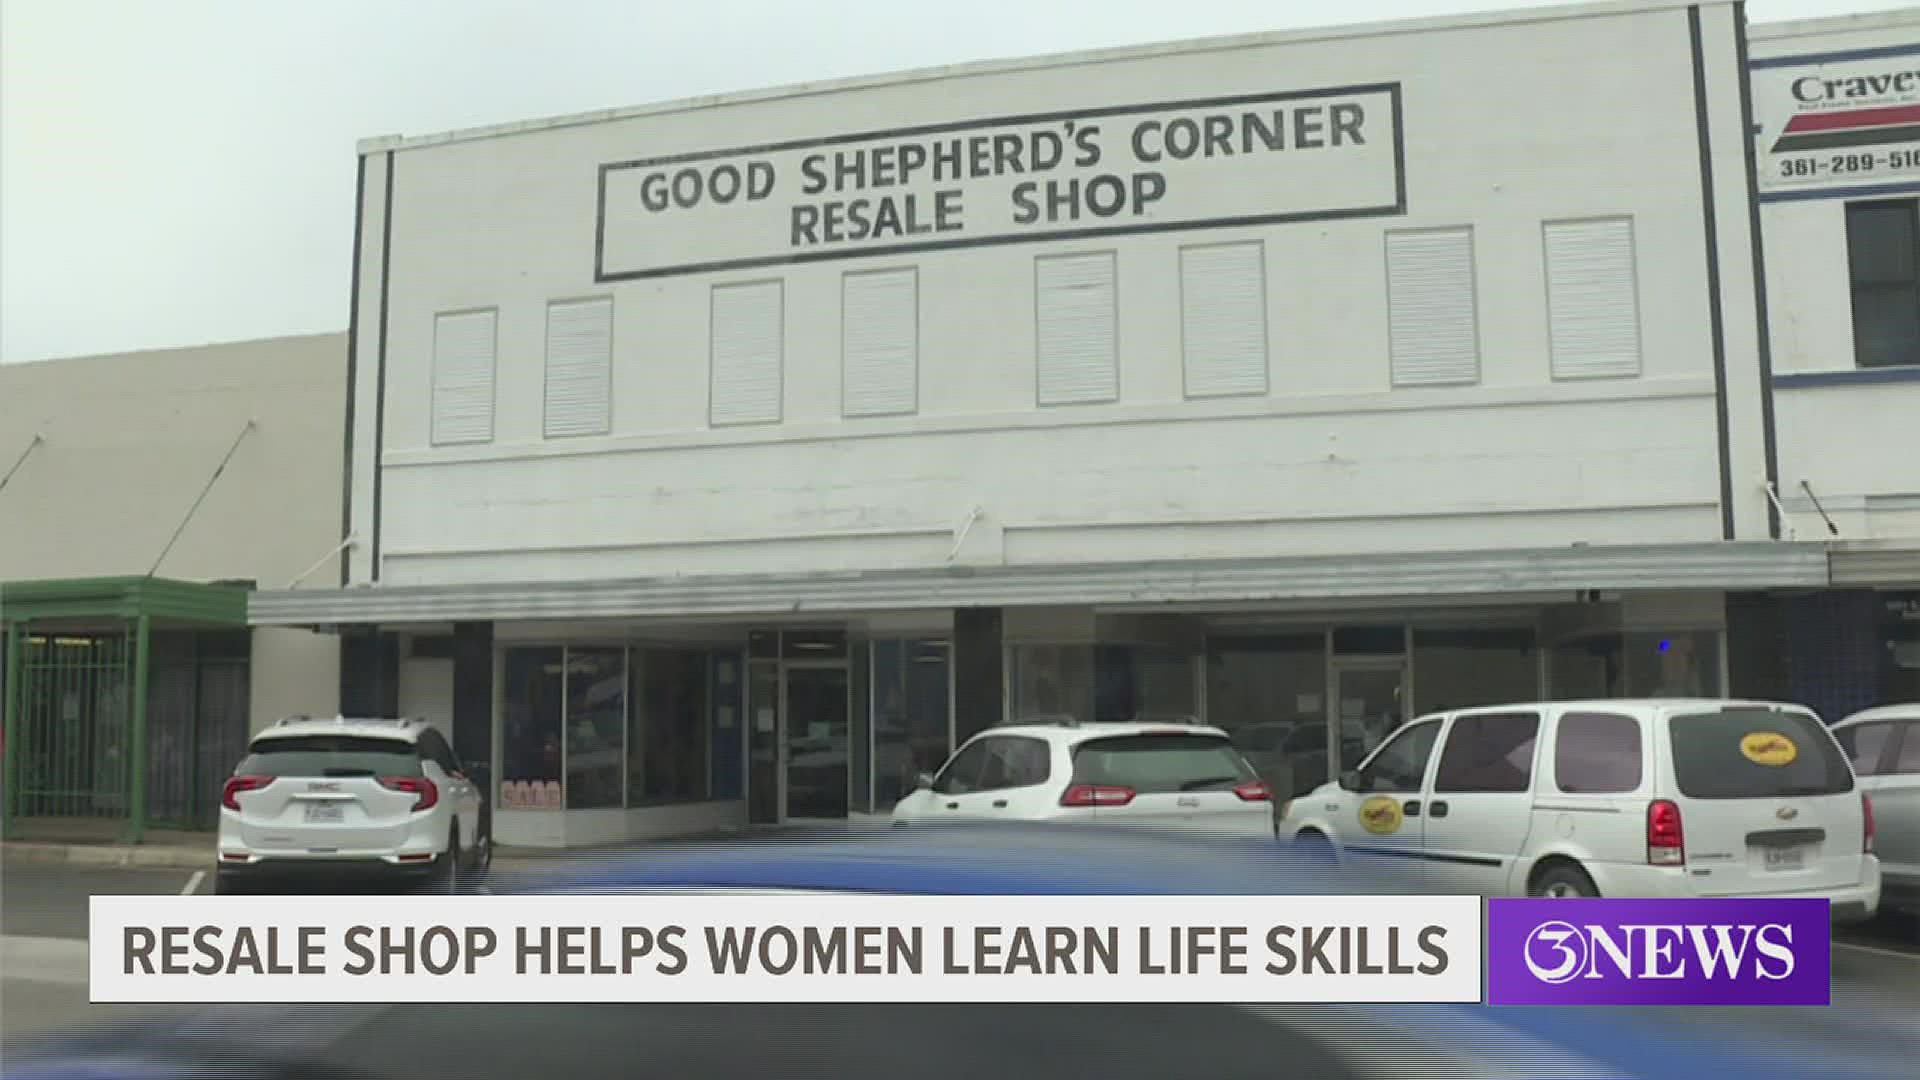 In 2015 the Good Shepherd's Corner Resale Shop changed how they gave back to the community by not just giving back monetarily, but also through teaching life skills.